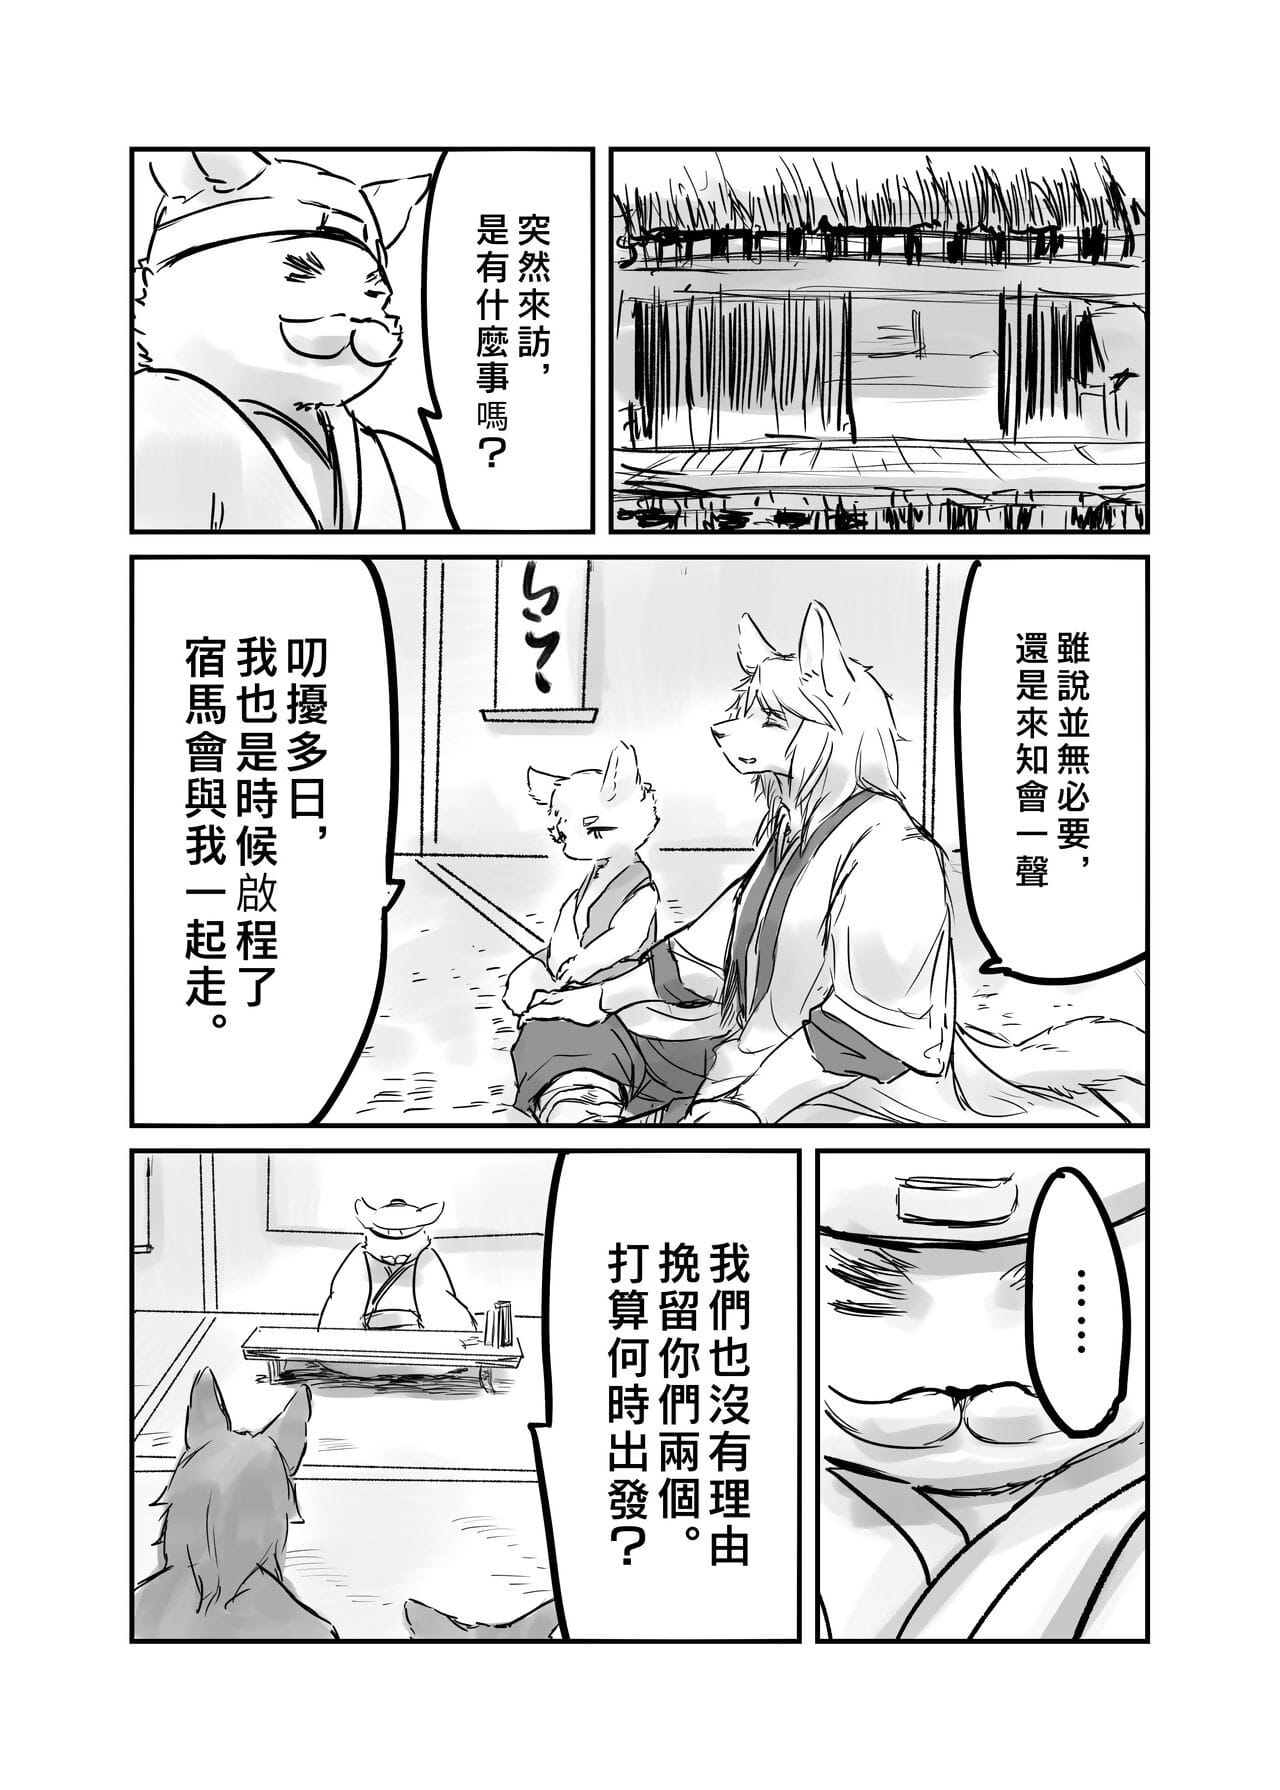 （the Besucher 他乡之人 by：鬼流 Teil 2 page 1